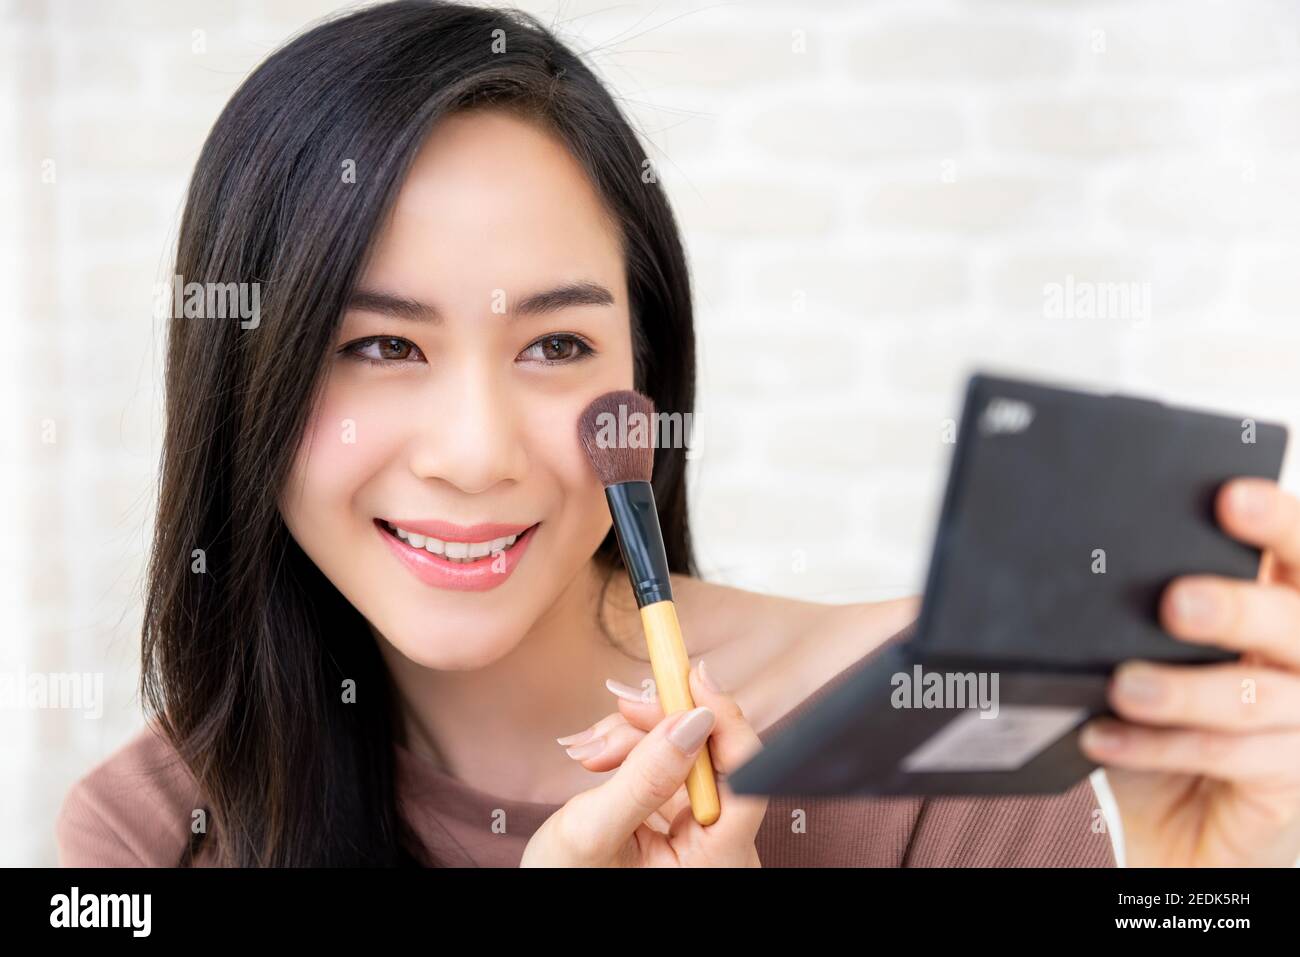 Young beautiful Asian woman professional beauty vlogger or blogger doing cosmetic makeup tutorial Stock Photo